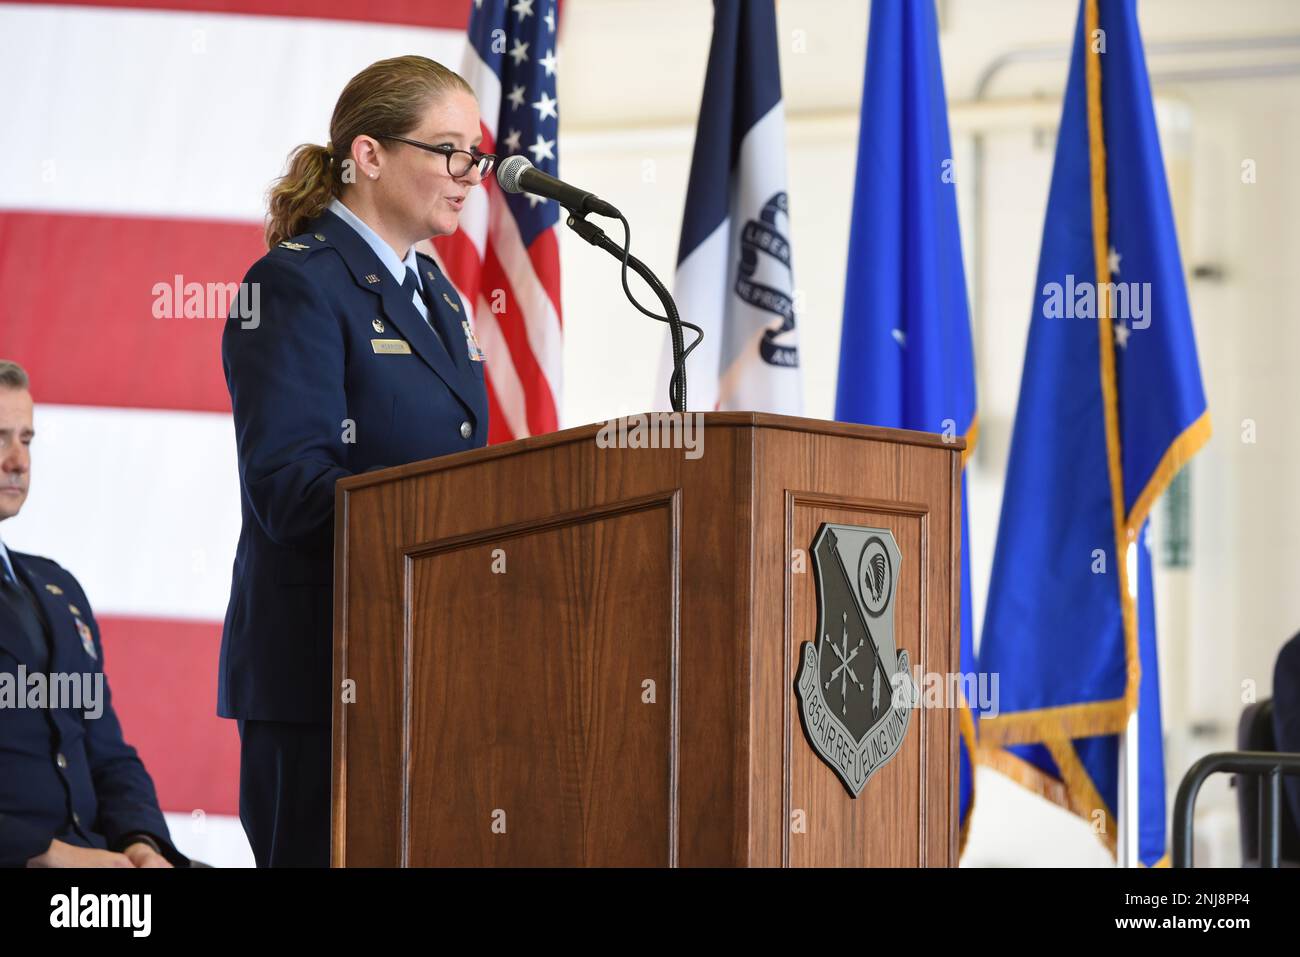 U.S. Air National Guard Col. Sonya L. Morrison, 185th Air Refueling Wing Commander, speaks to 185th ARW personnel at her Change of Command ceremony at the 185th Air Refueling Wing at Sioux City, Iowa, August 6, 2022. Morrison is replacing Col. Mark A. Muckey as wing commander. Stock Photo